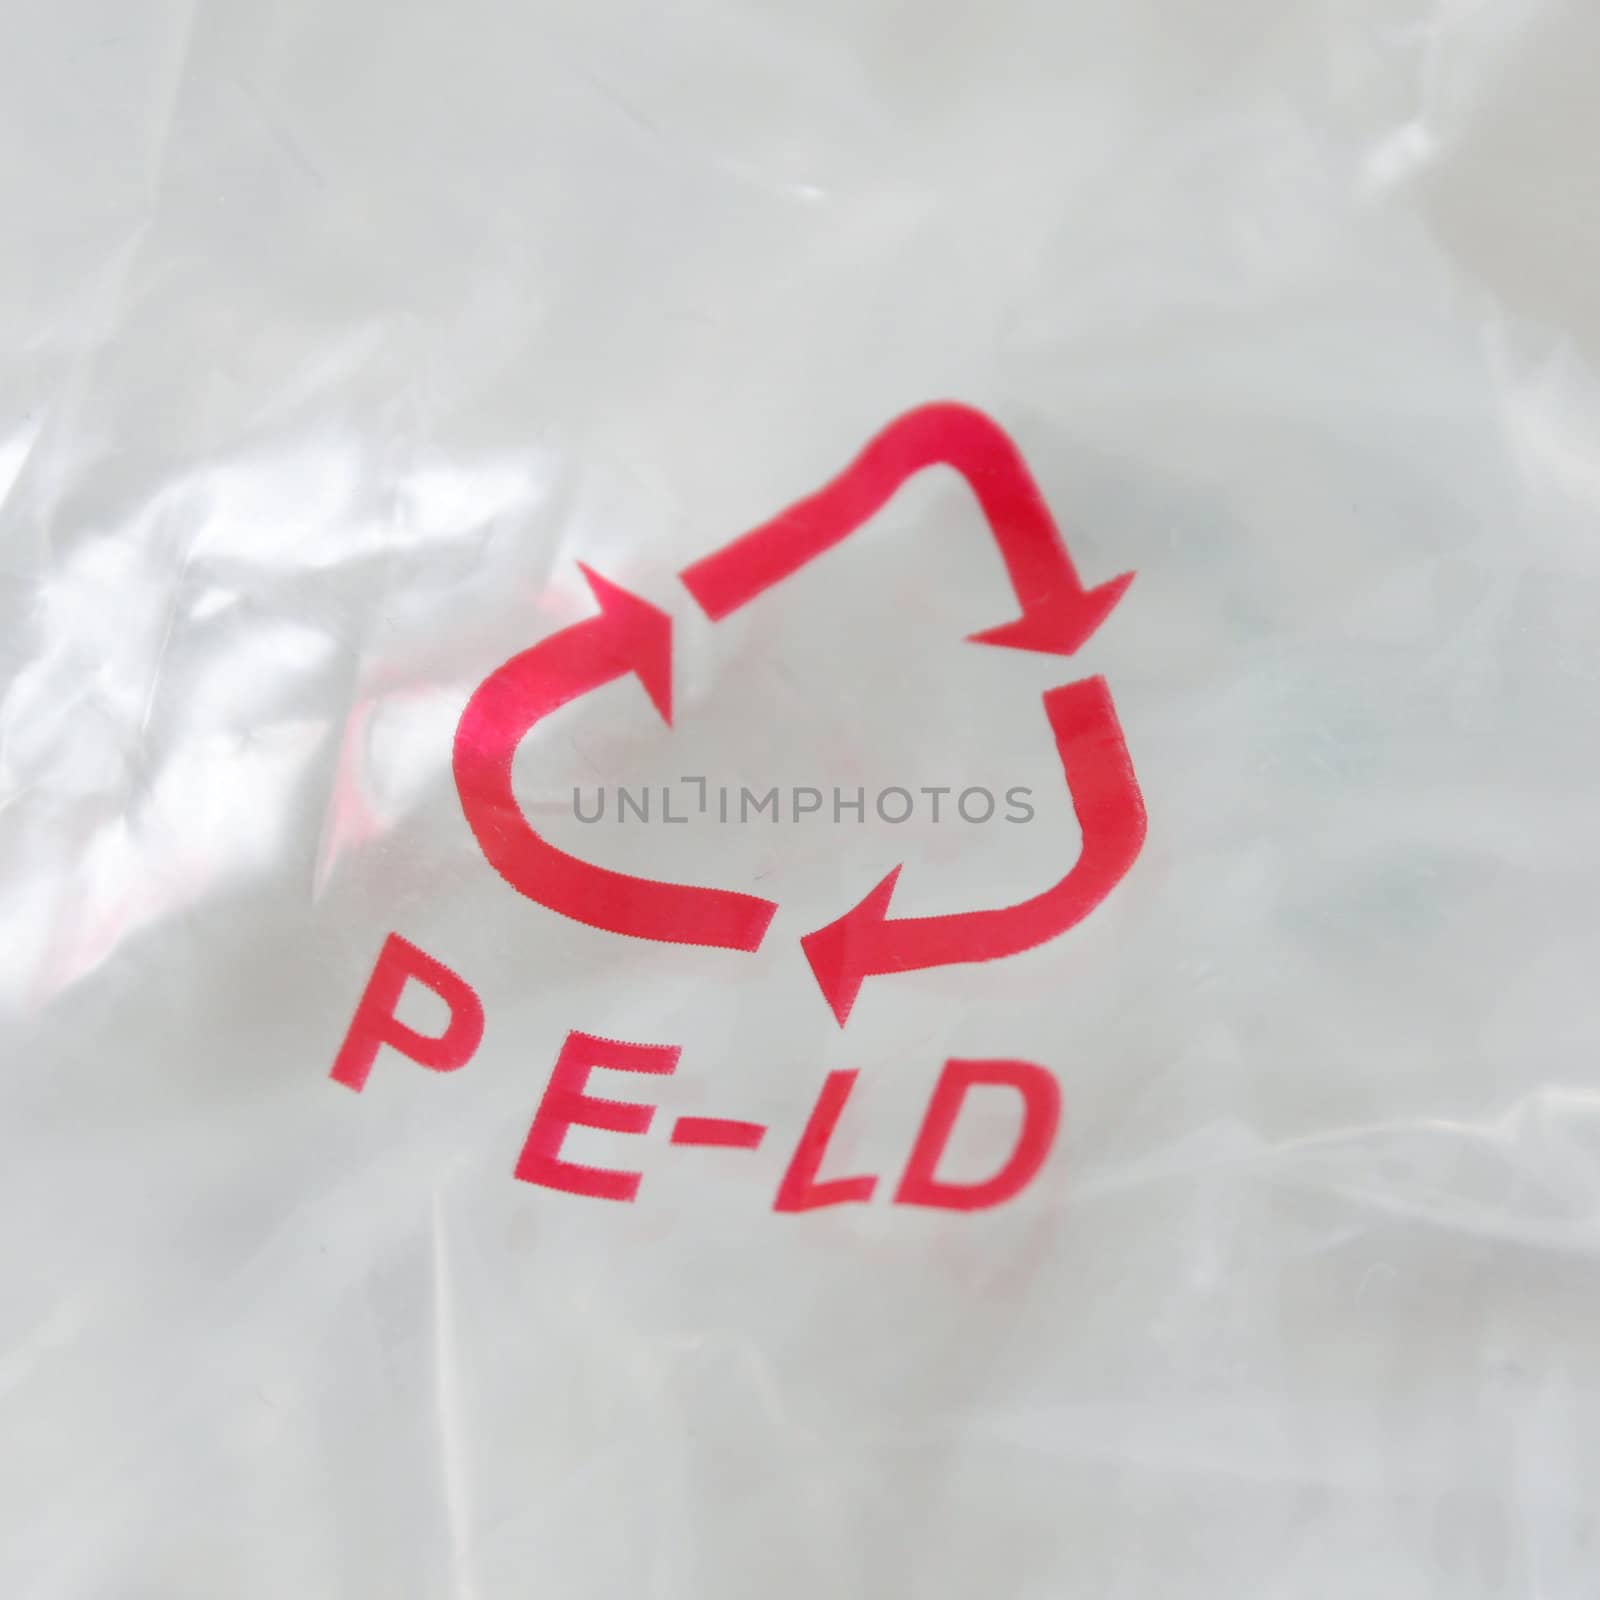 Plastic recycled with a recycling logo